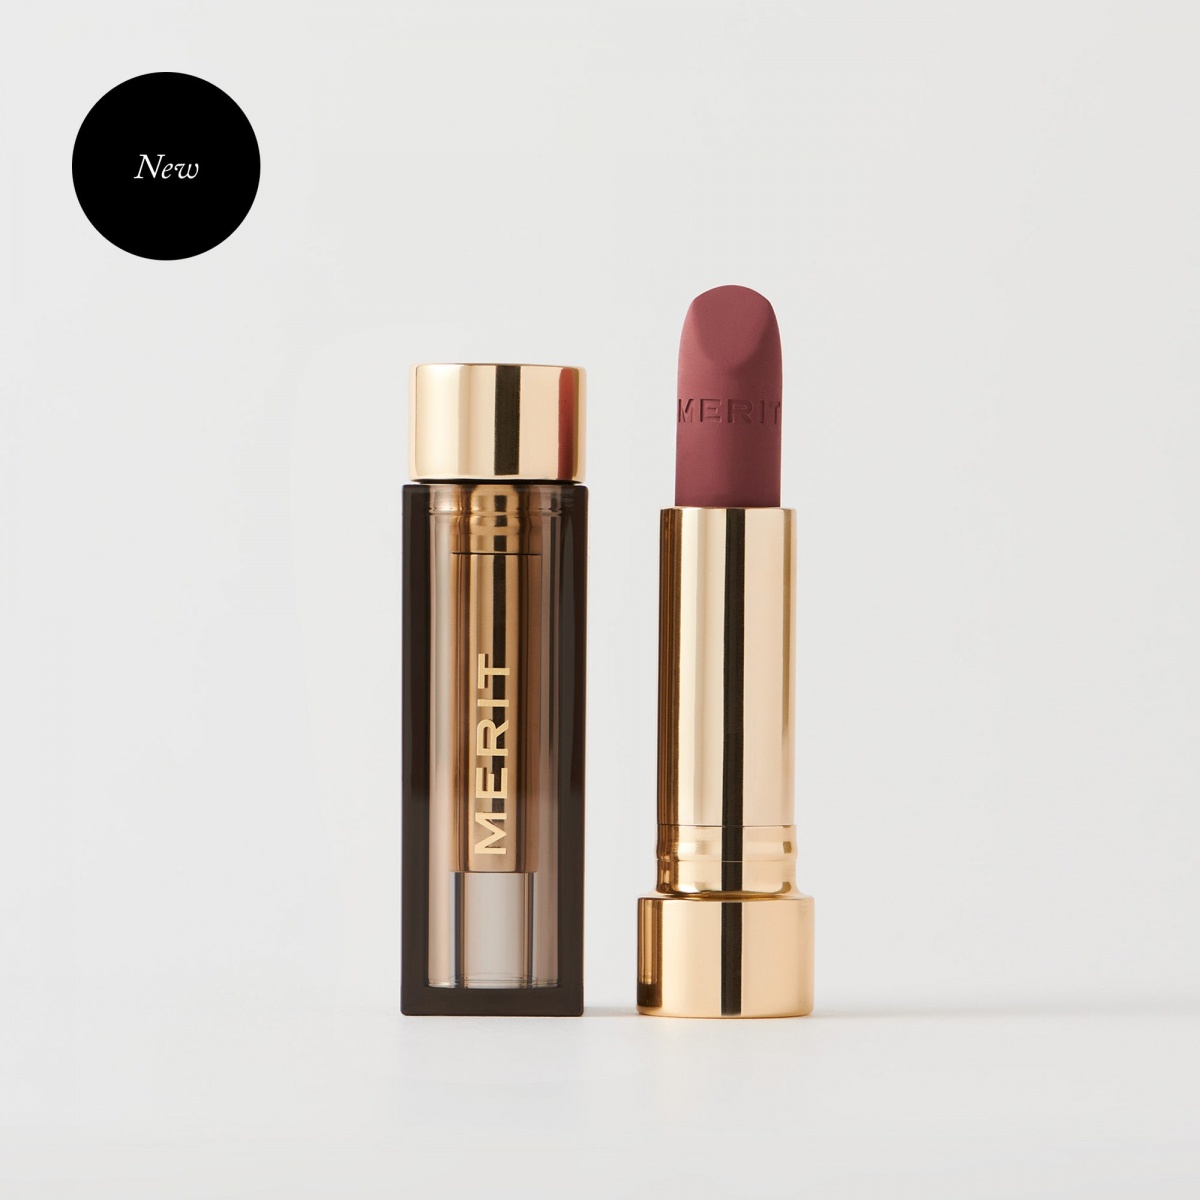 What Makes Merit Lipsticks Stand Out?